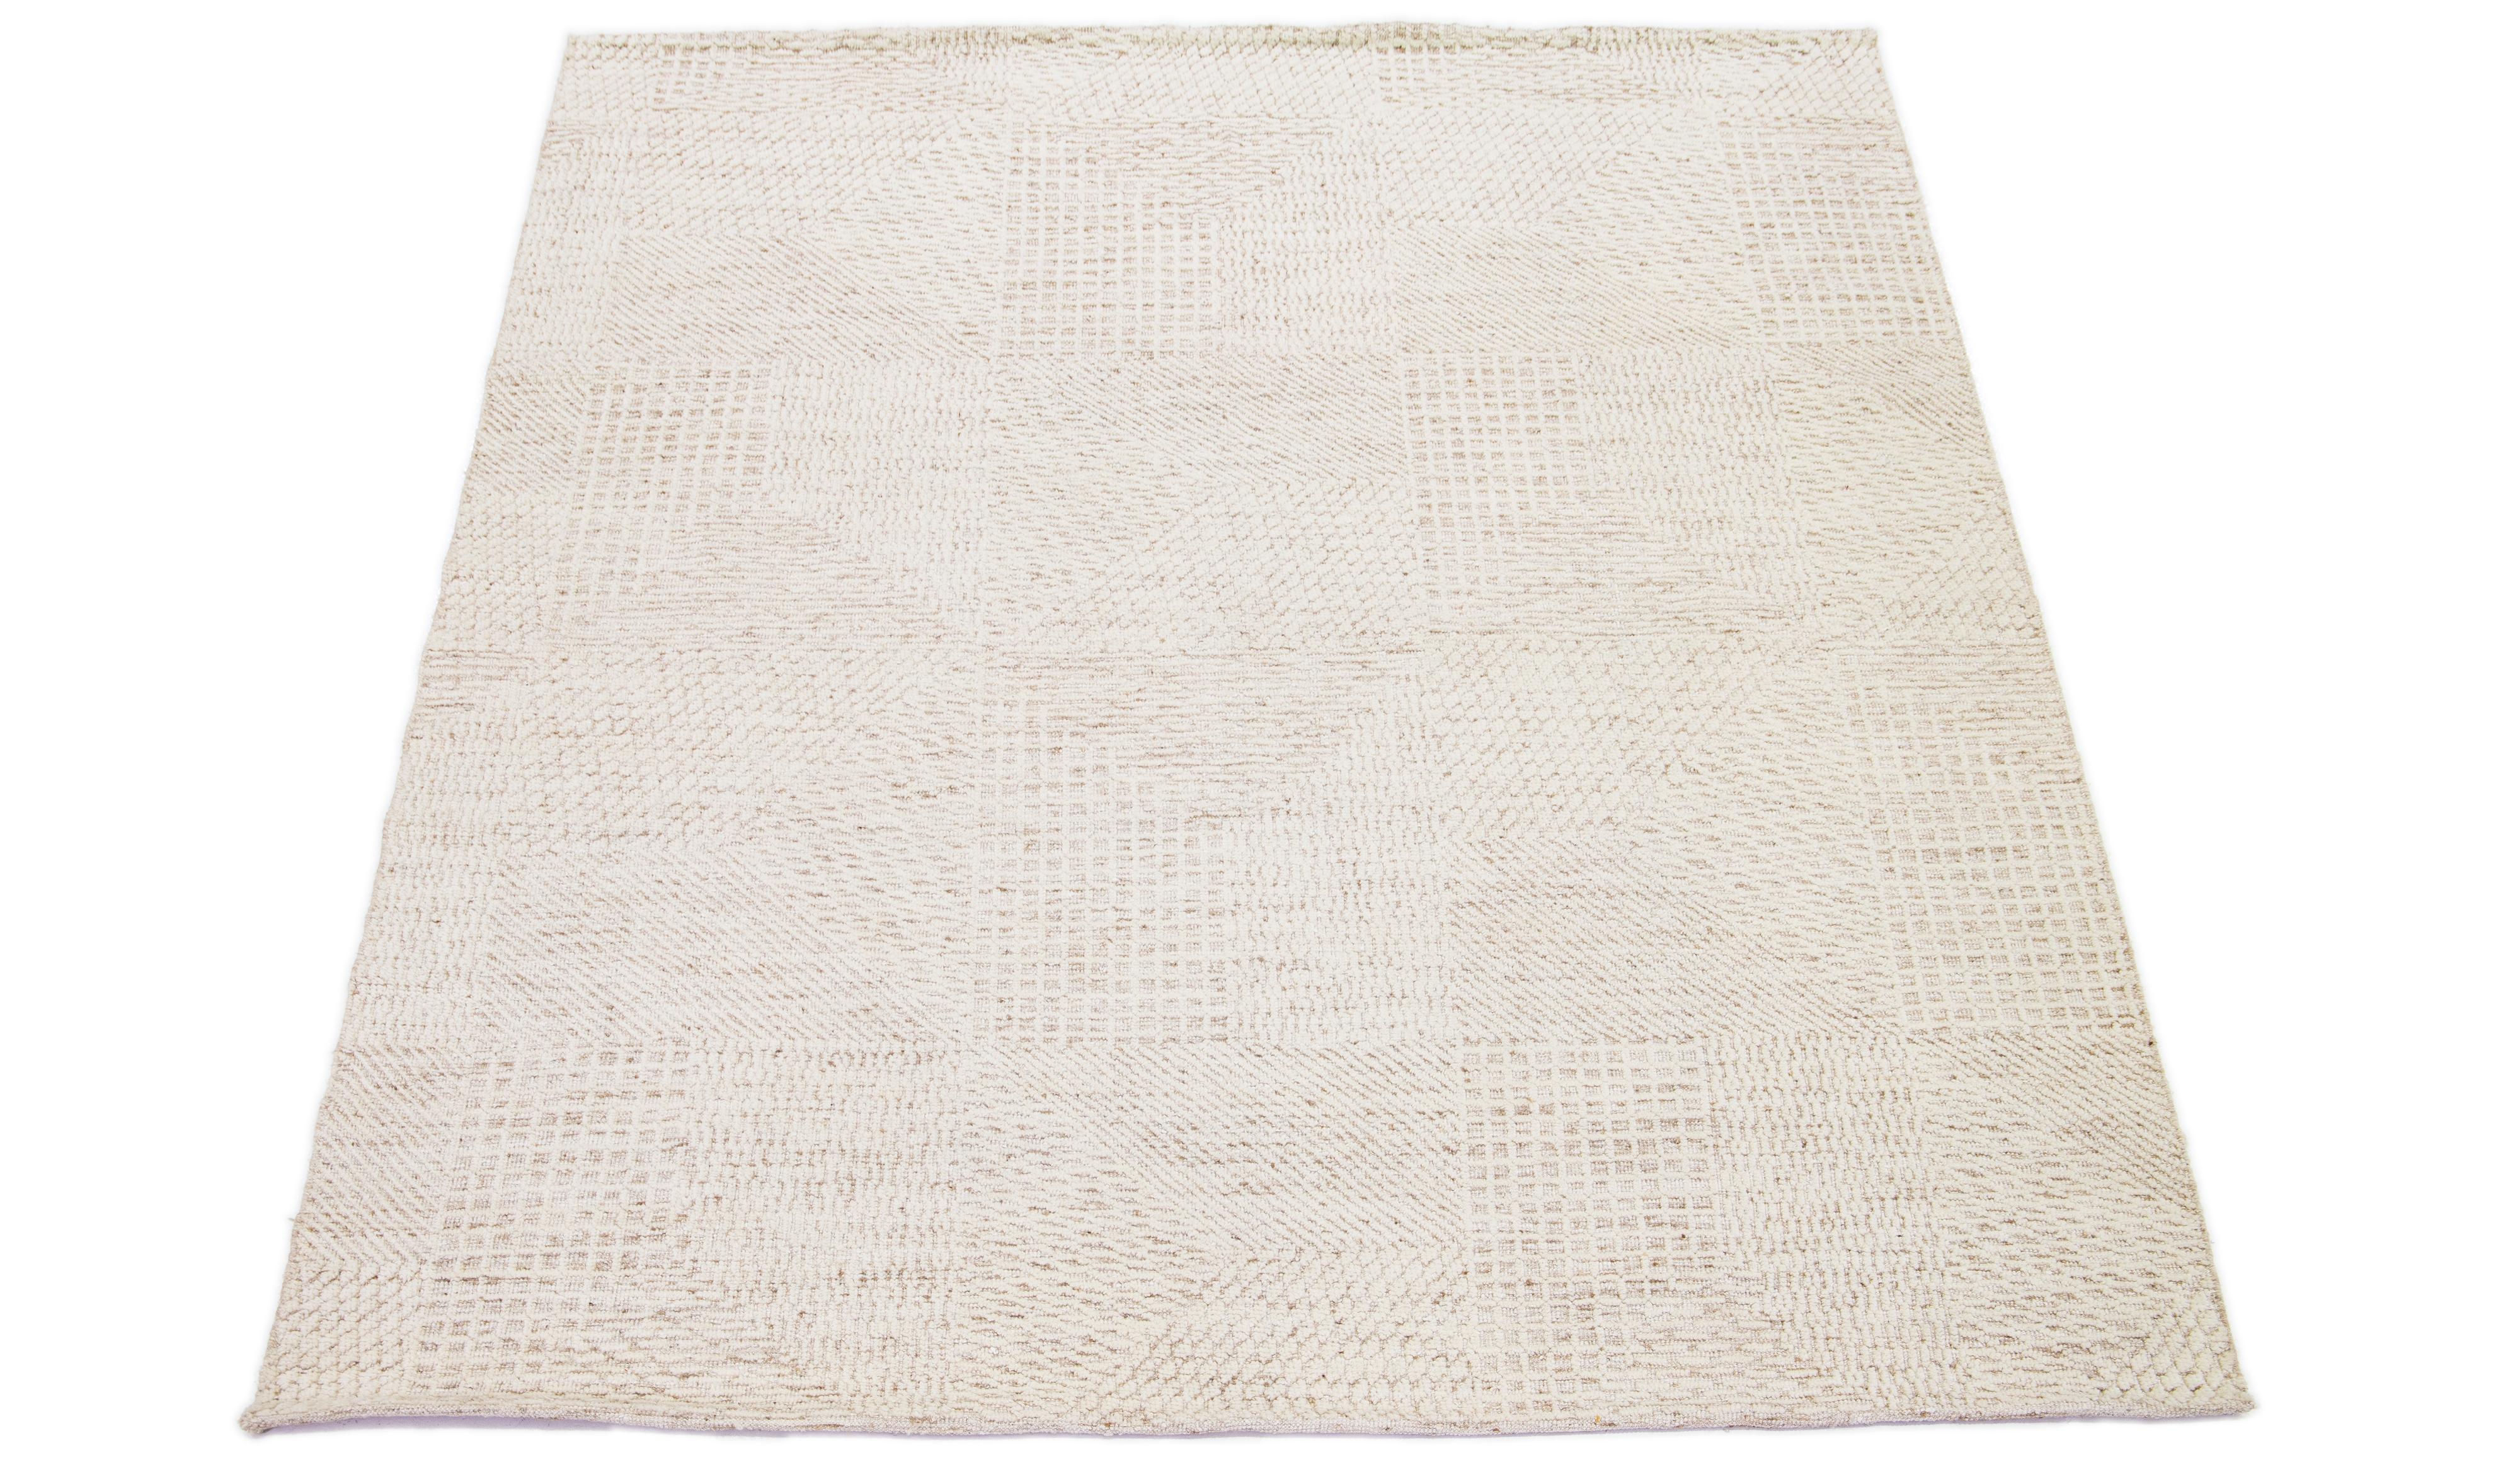 This hand-knotted wool rug showcases a modern Moroccan-inspired motif highlighting understated natural beige hues against a bold beige and brown foundation, creating a captivating abstract geometric pattern.

This rug measures 7'10